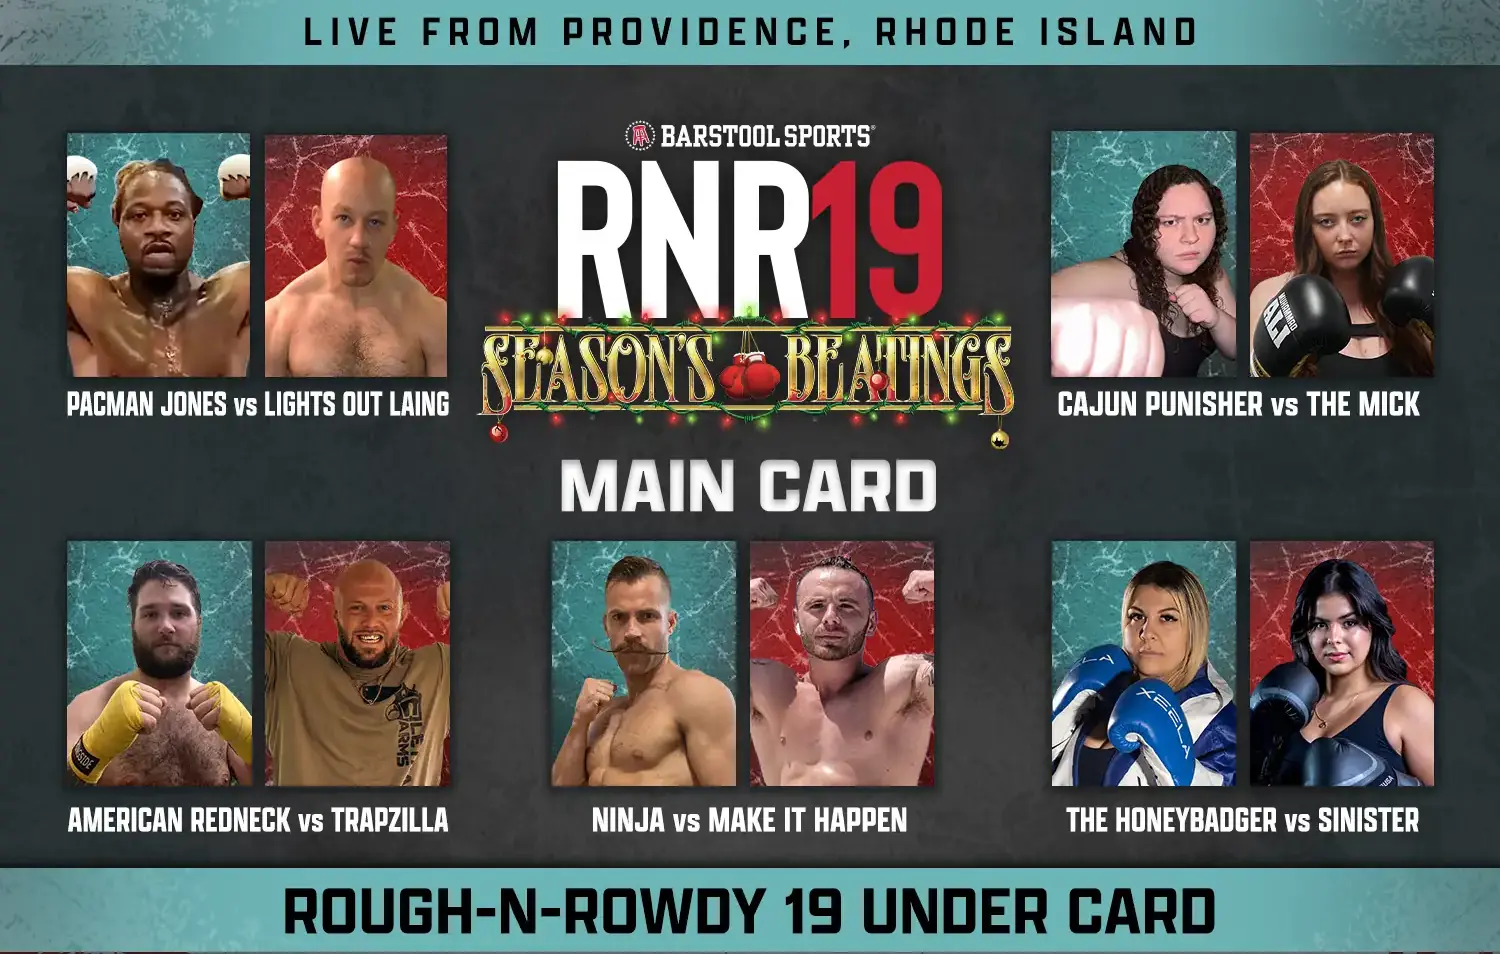 Rough N' Rowdy 19 featured banner containing fight cards and RNR19 logo